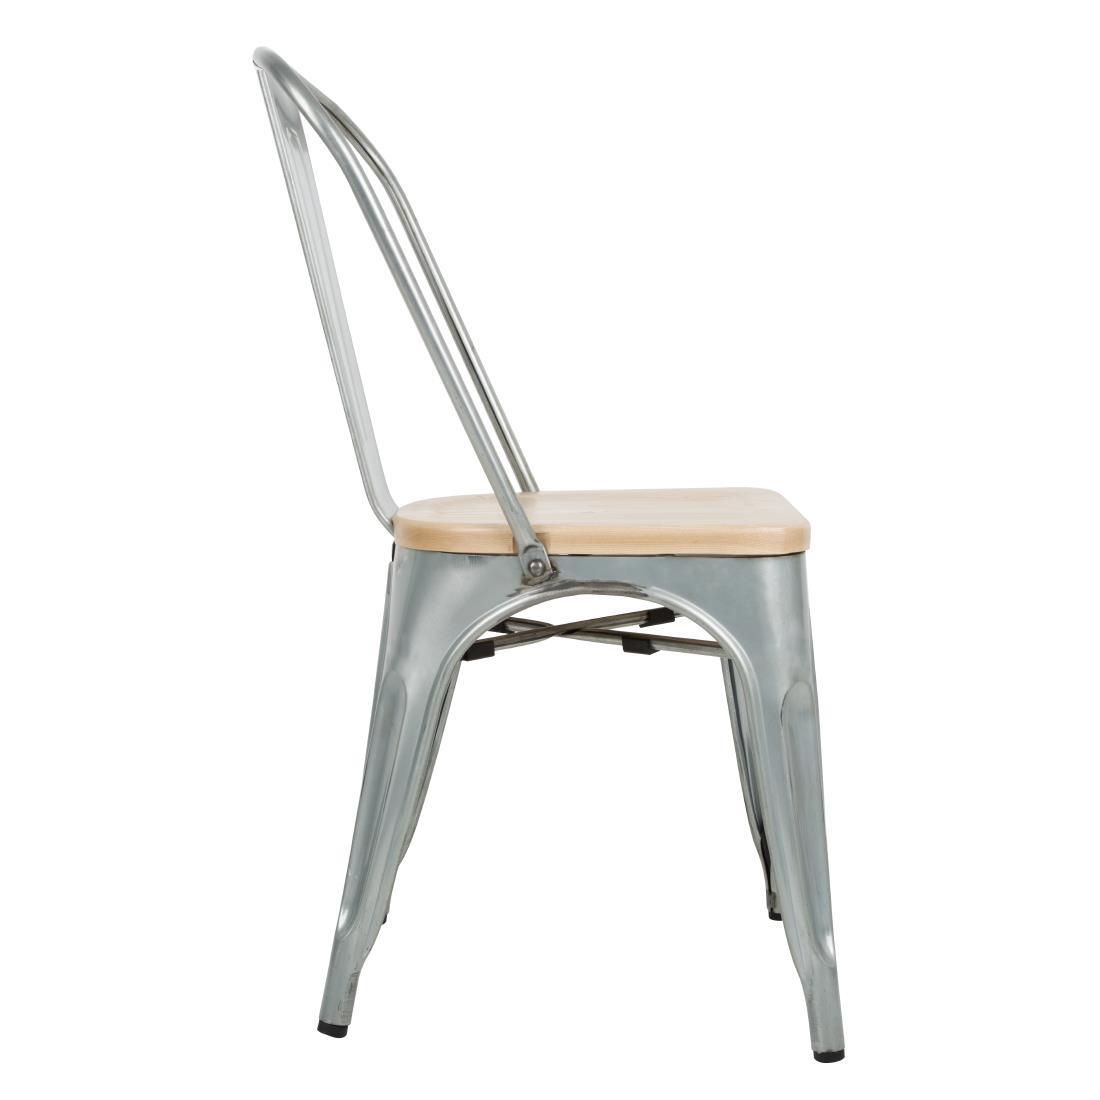 Bolero Bistro Side Chairs with Wooden Seat Pad Galvanised Steel (Pack of 4) - GM642  - 3